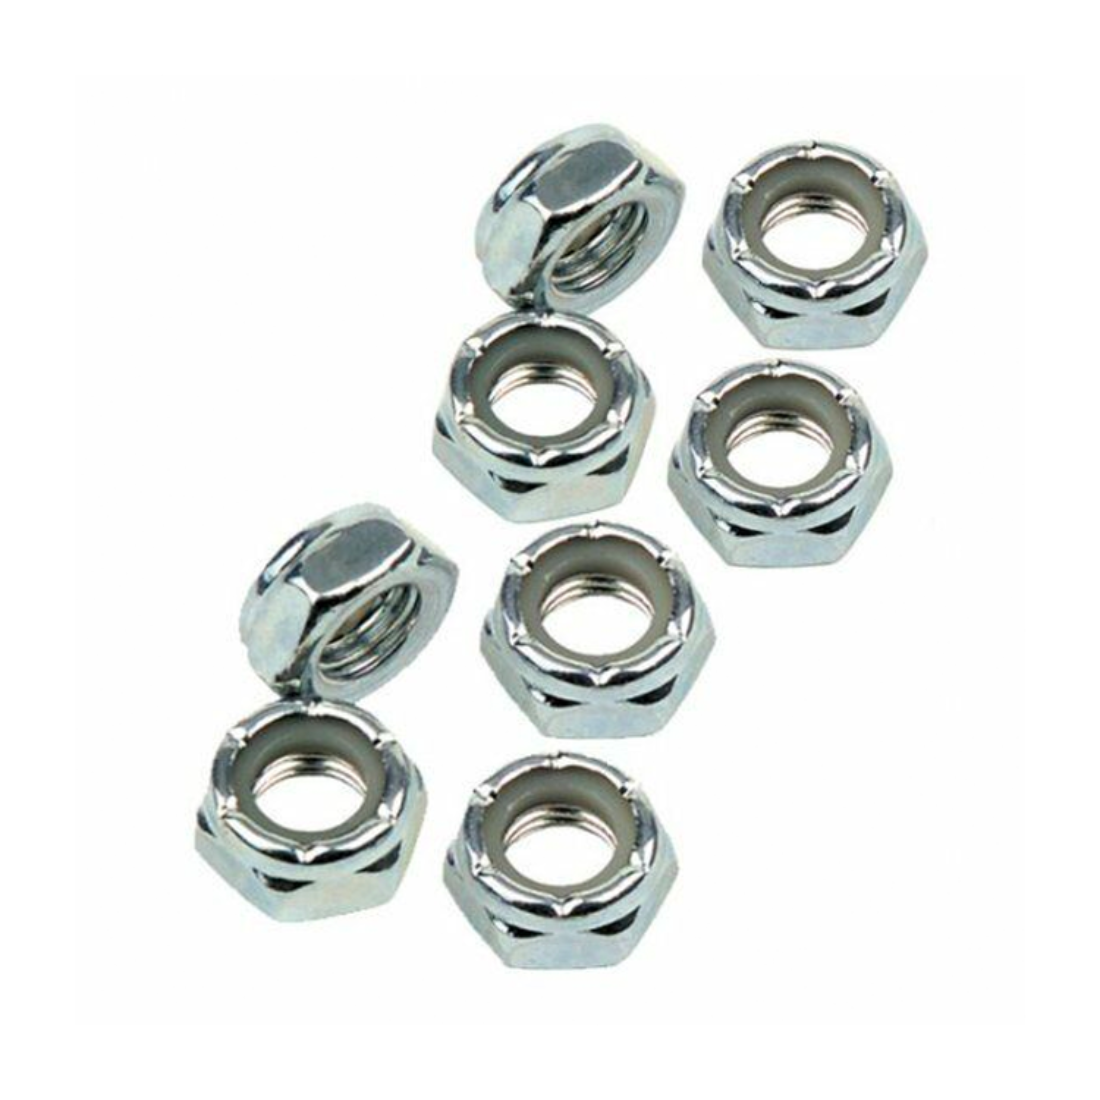 Roll-Line Axle Lock Nuts Silver 7mm - 8 pack Nuts